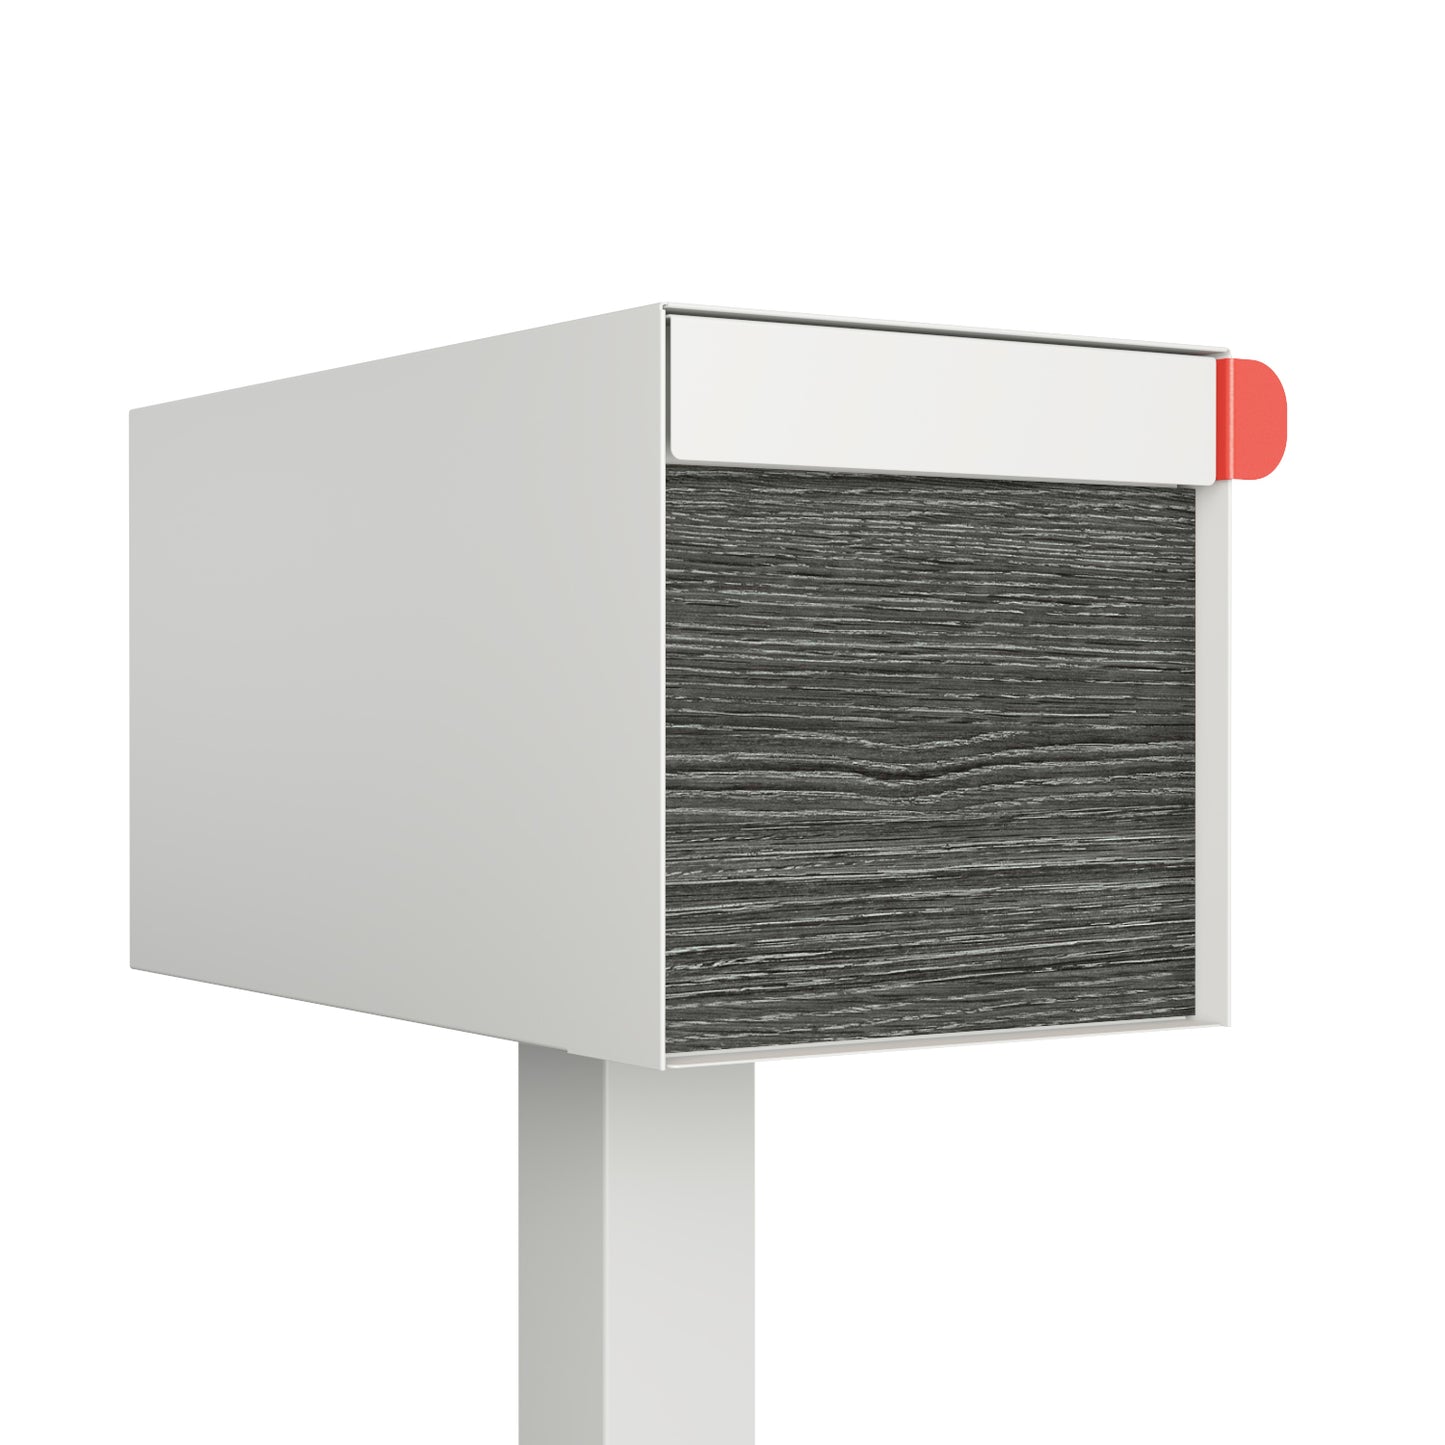 Town Square by Bravios - Large Capacity Mailbox with Post - White with Jazz Wood Panel